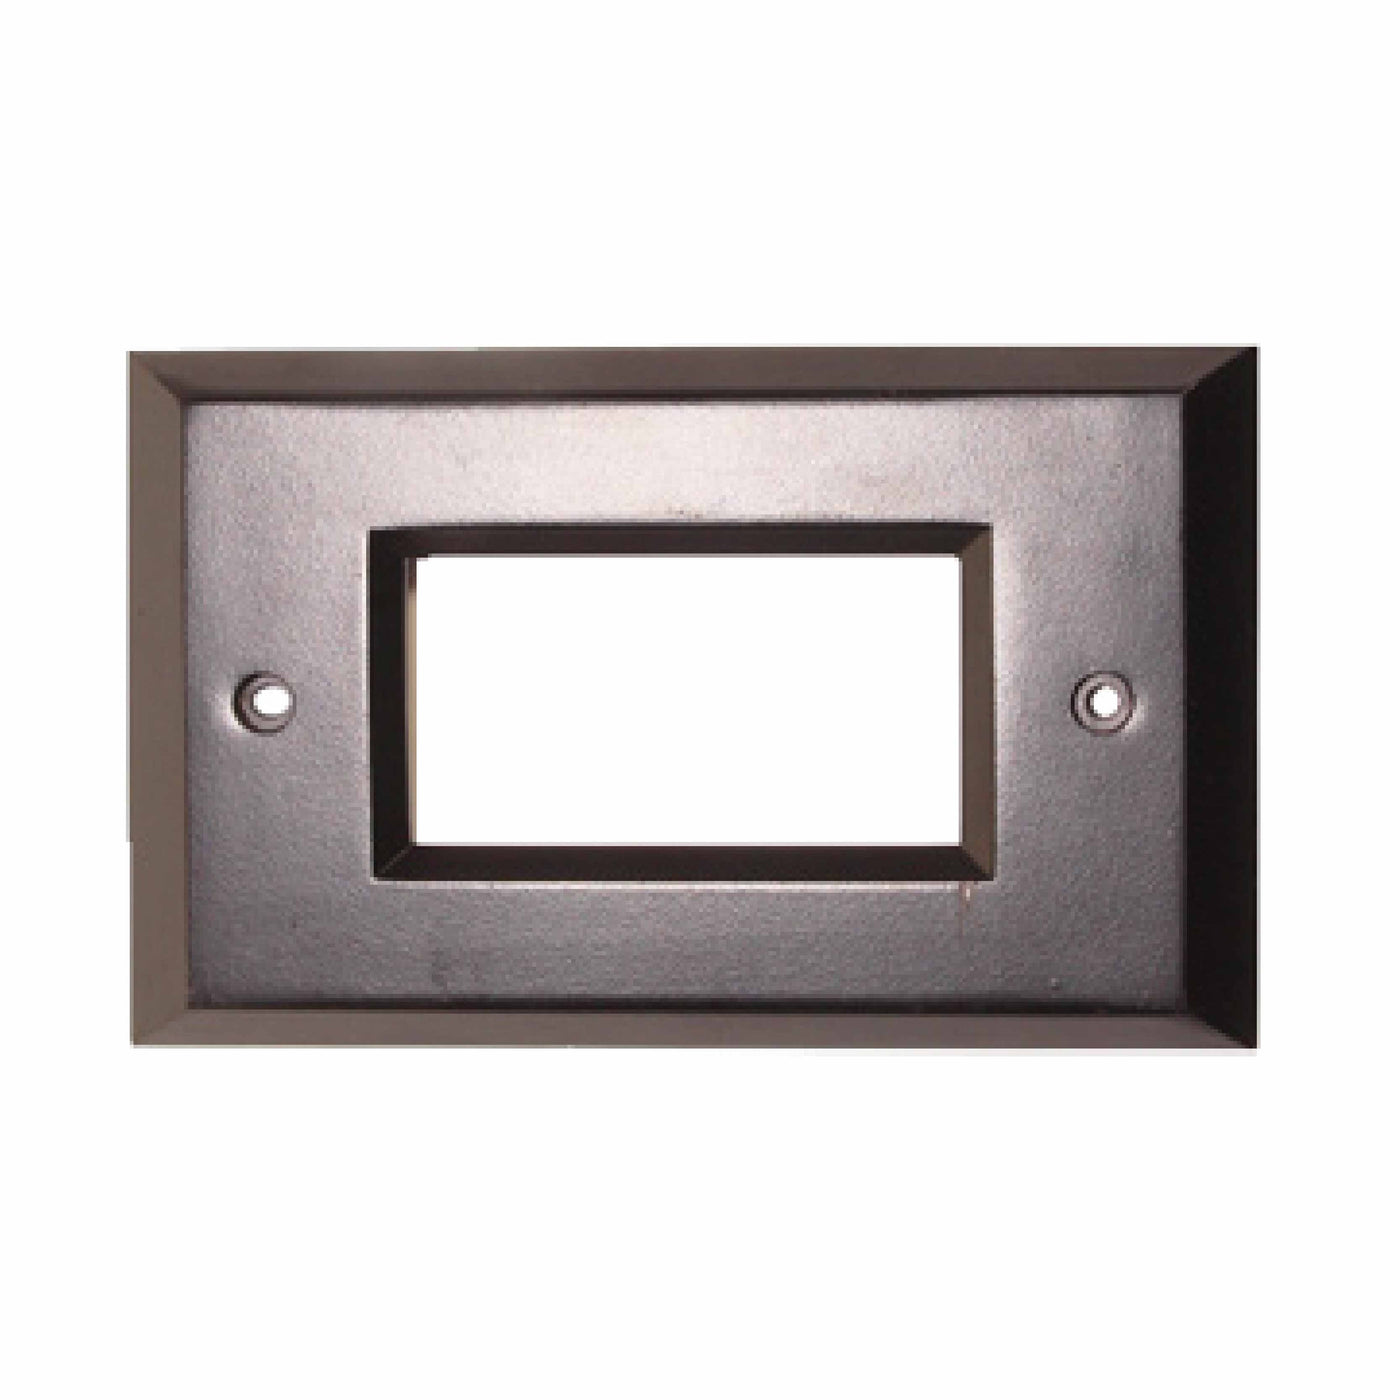 Westgate Step Light, 104 Lumens, 2W, 120V, Oiled Rubber Bronze, Brushed Nickel, White, or Antique Bronze Finish, Multiple Covers Available